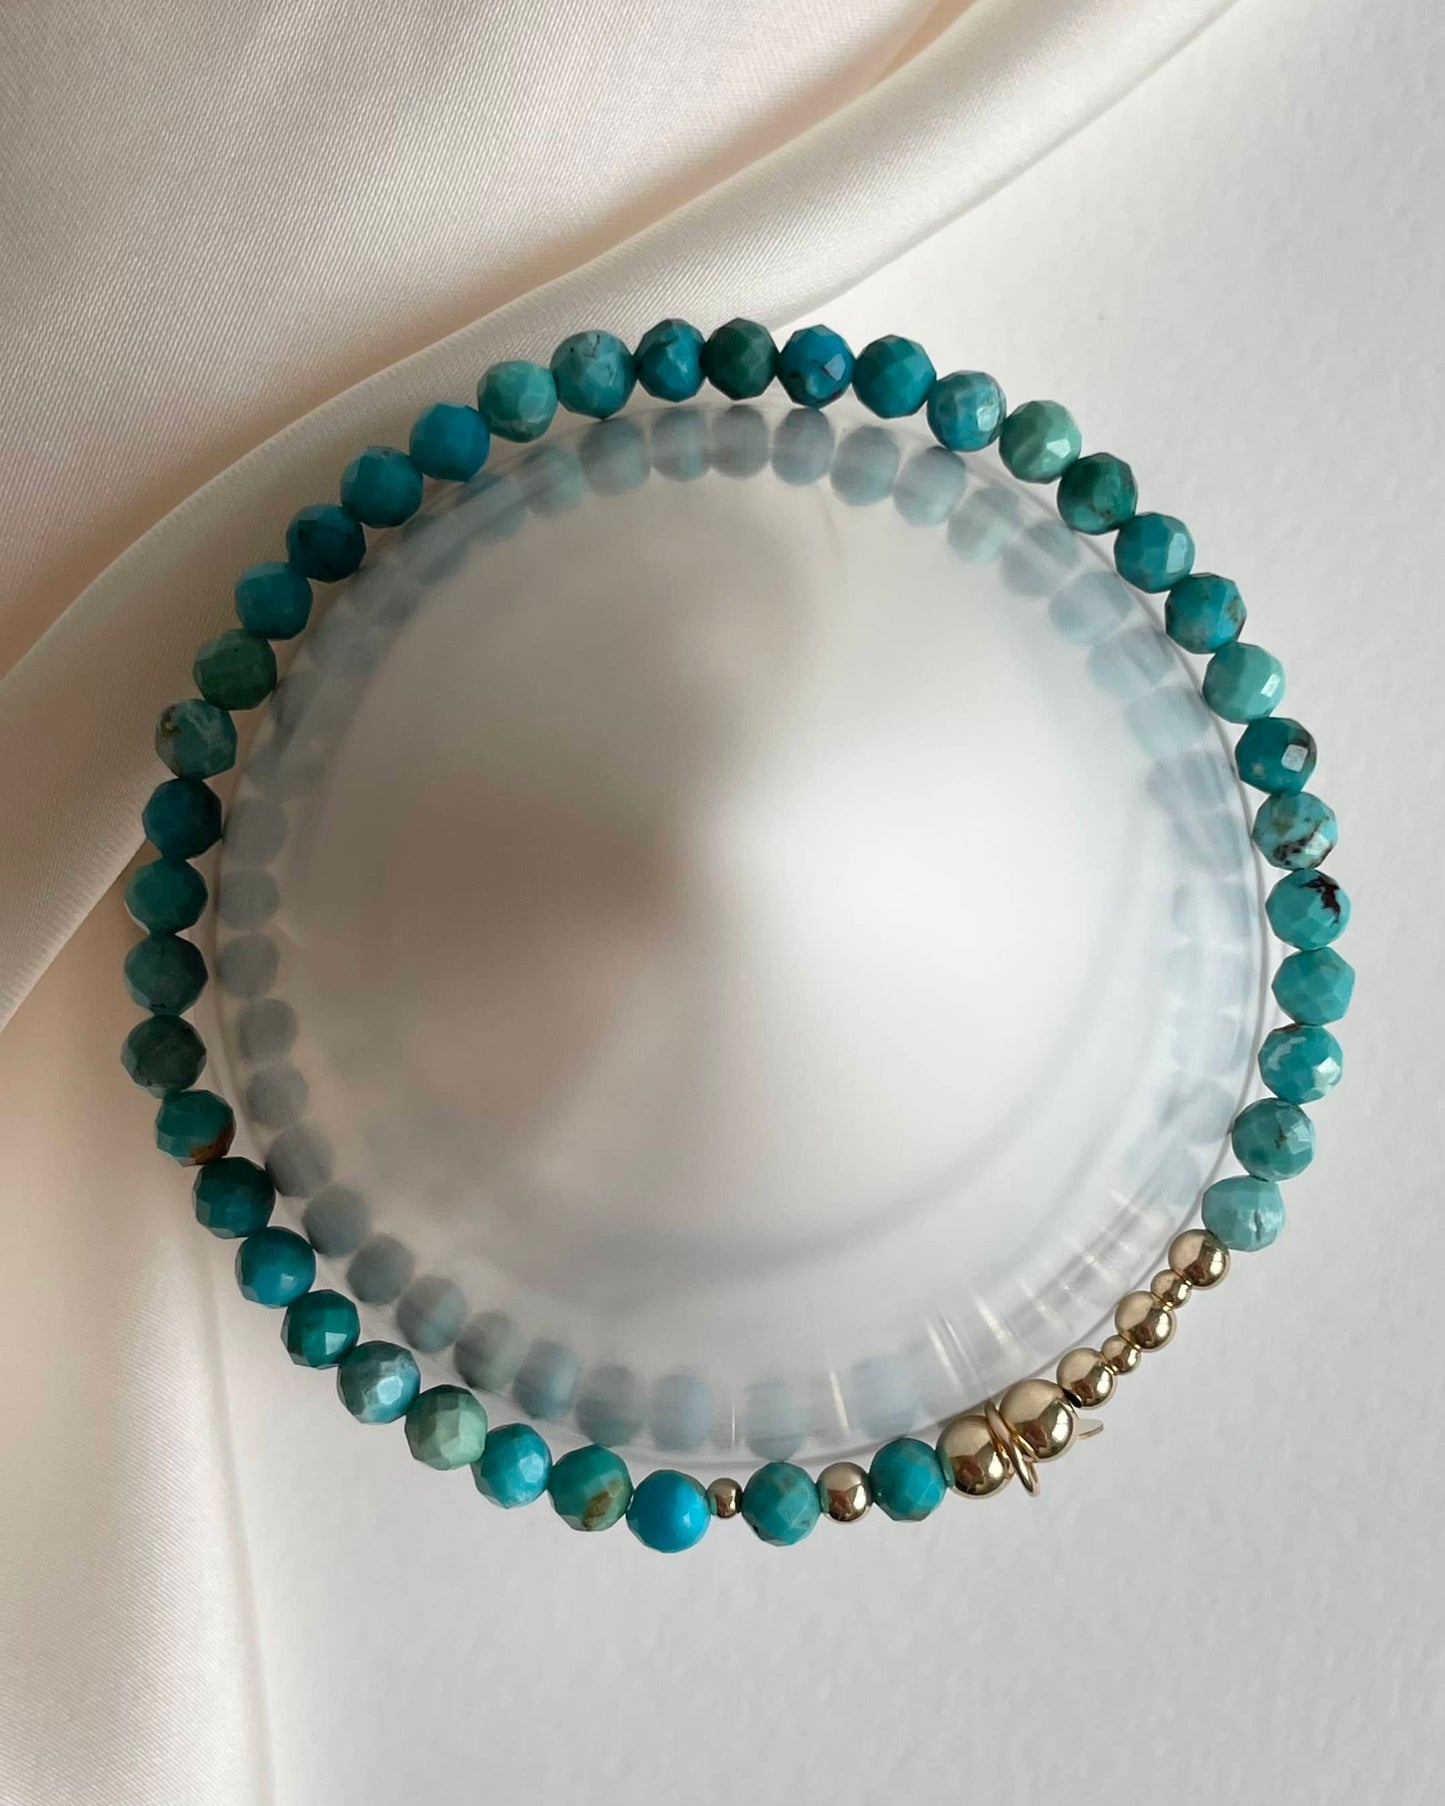 Gold filled December birthstone bracelet made with Natural Turquoise.